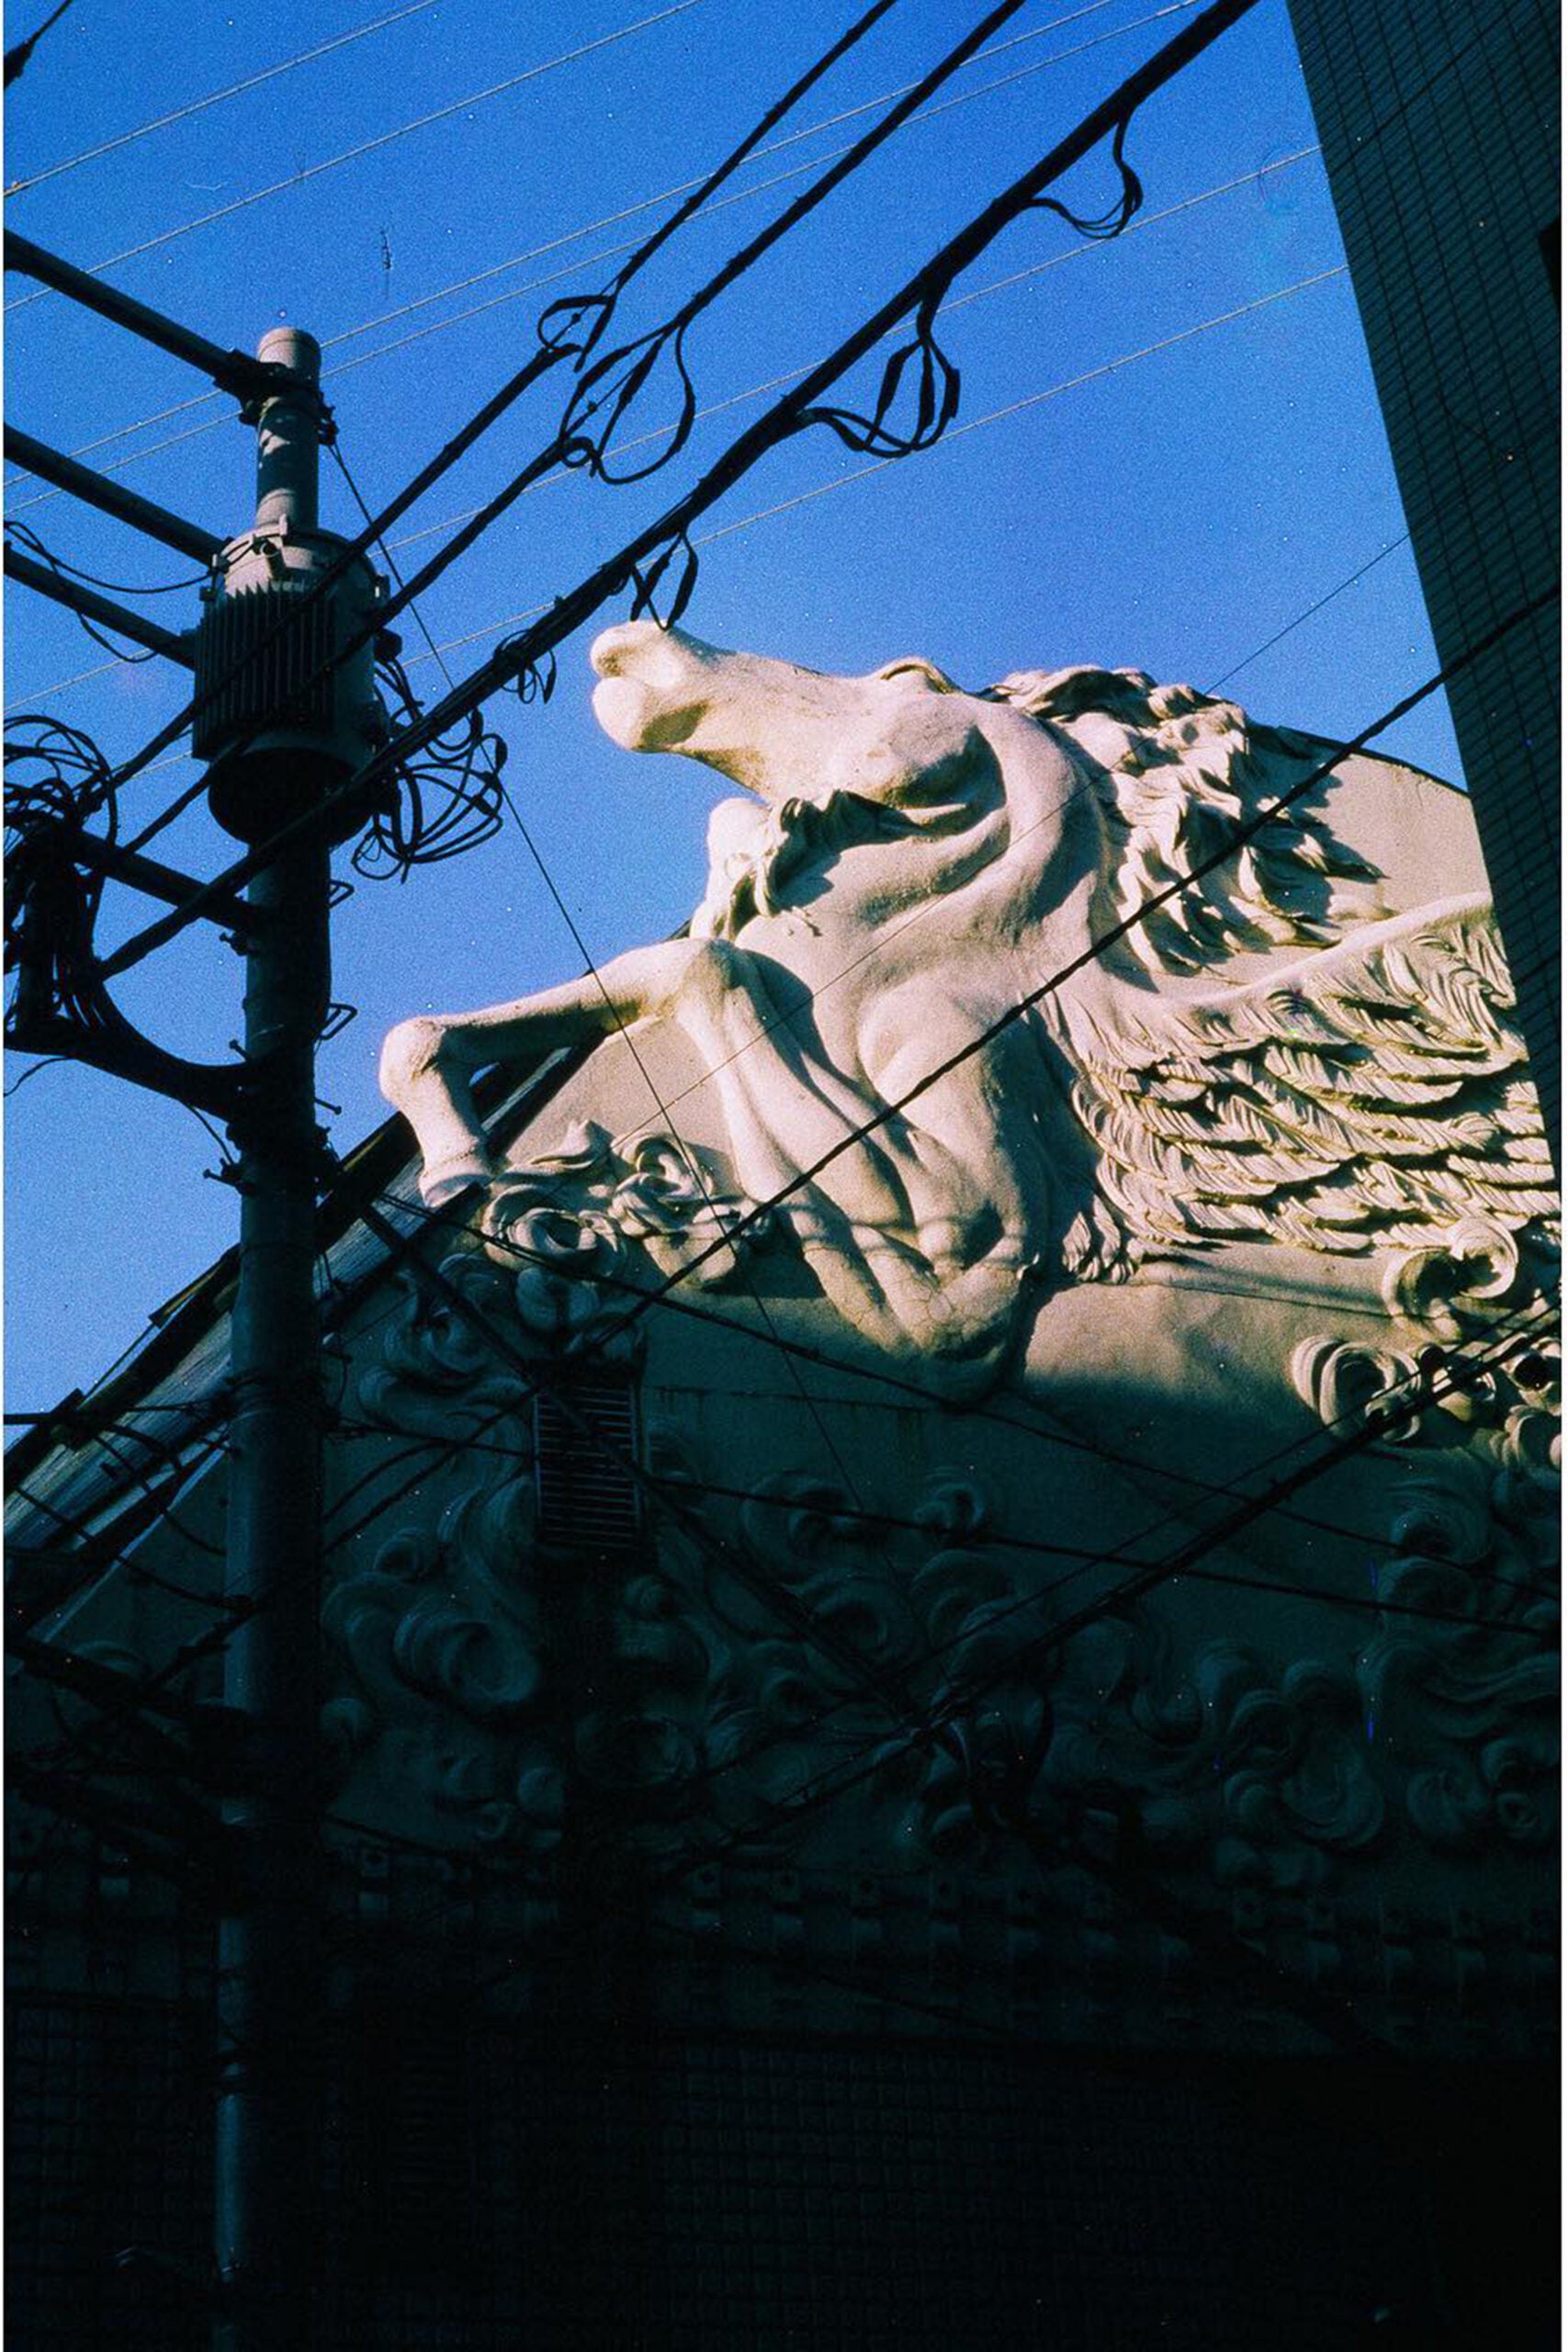 Behind it is a sculpture with a blue sky, shot with the new Fugufilm 400 slide film.